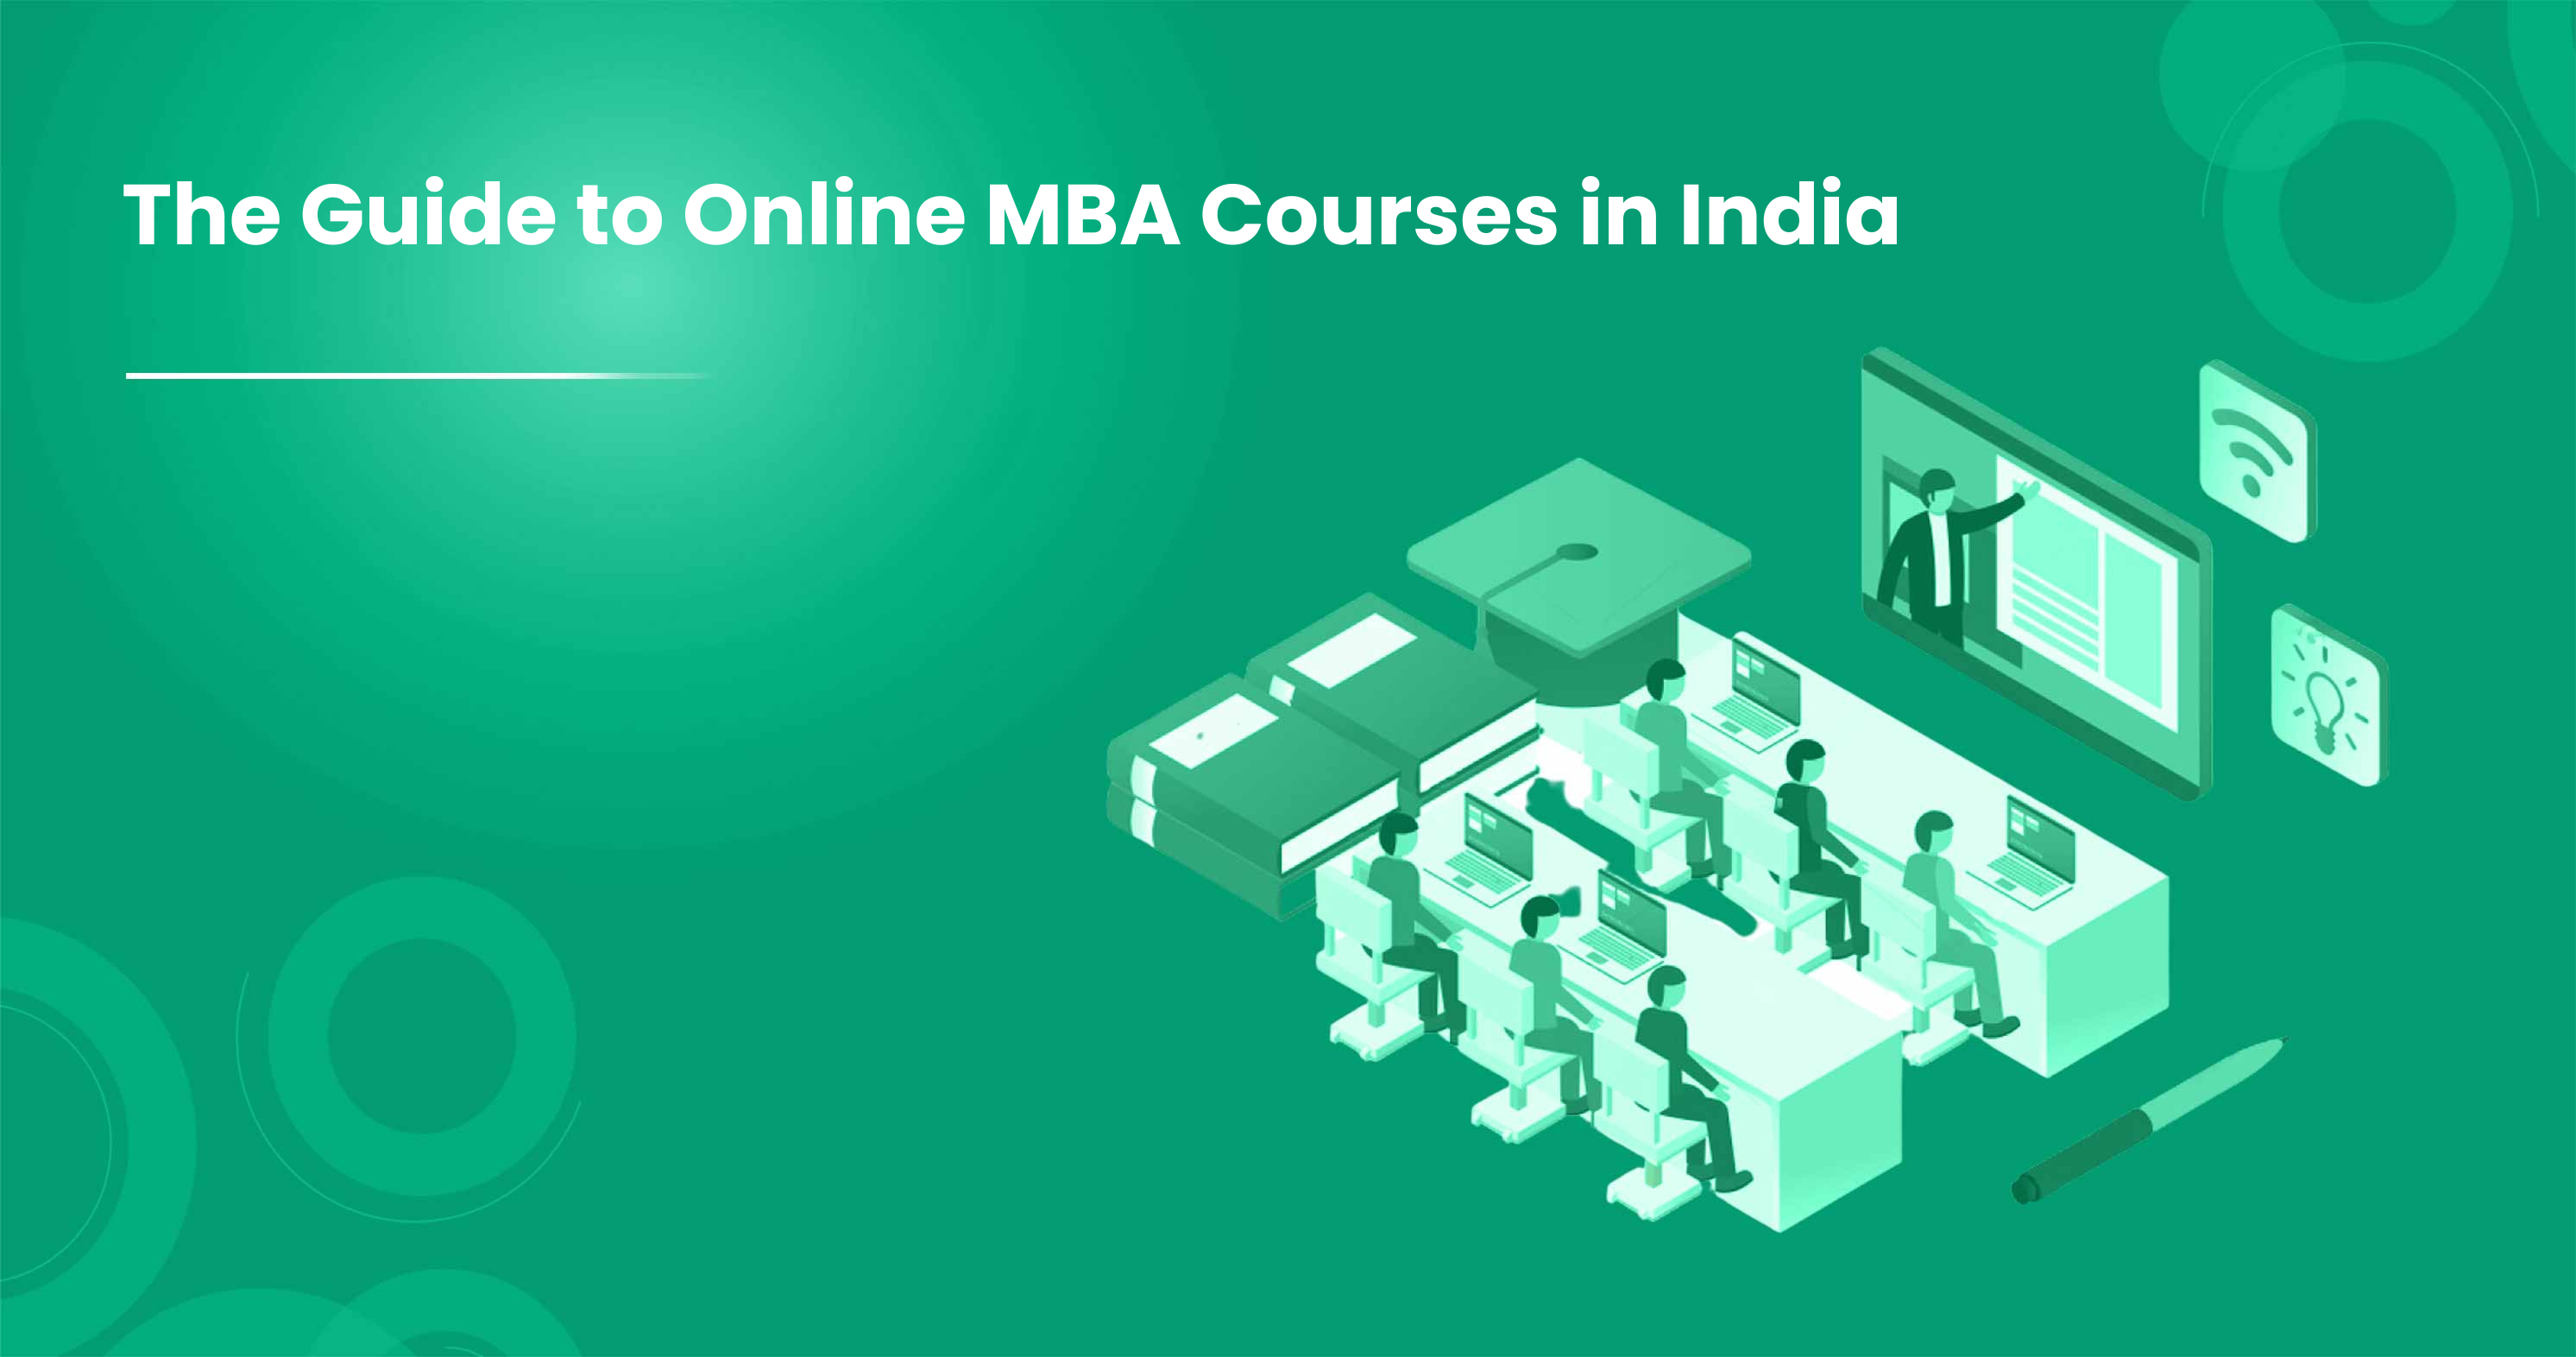 The Guide to Online MBA Courses in India